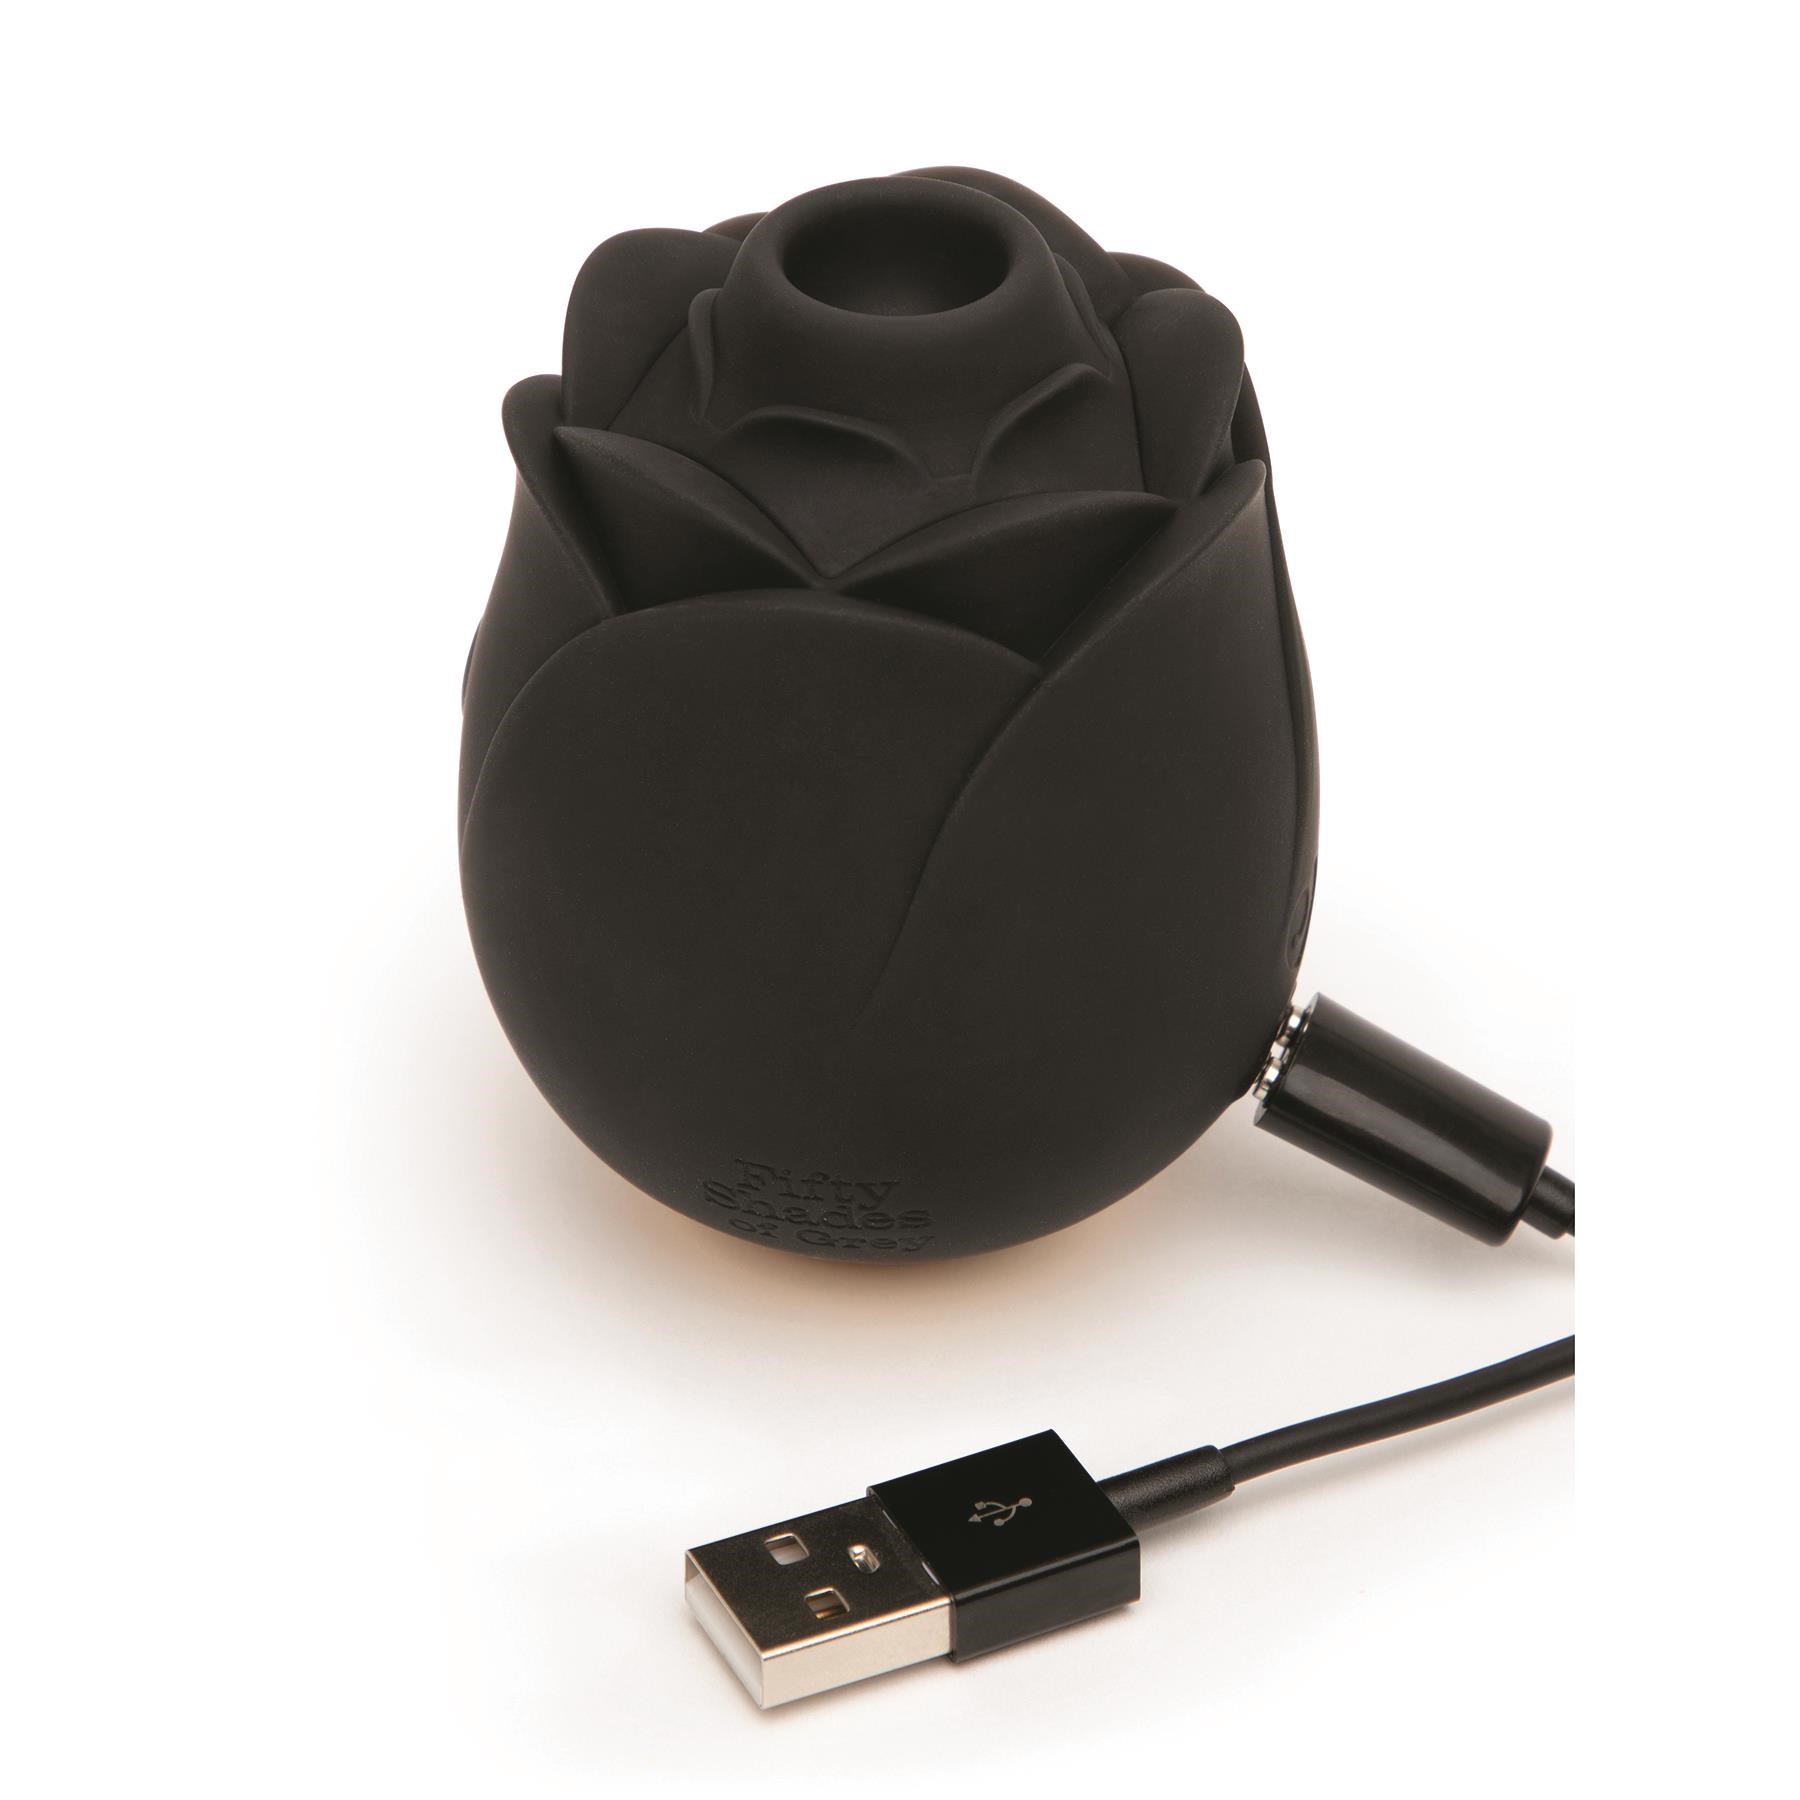 Fifty Shades of Grey Hearts And Flowers Clitoral Stimulator - Showing Where Charging Cable is Placed